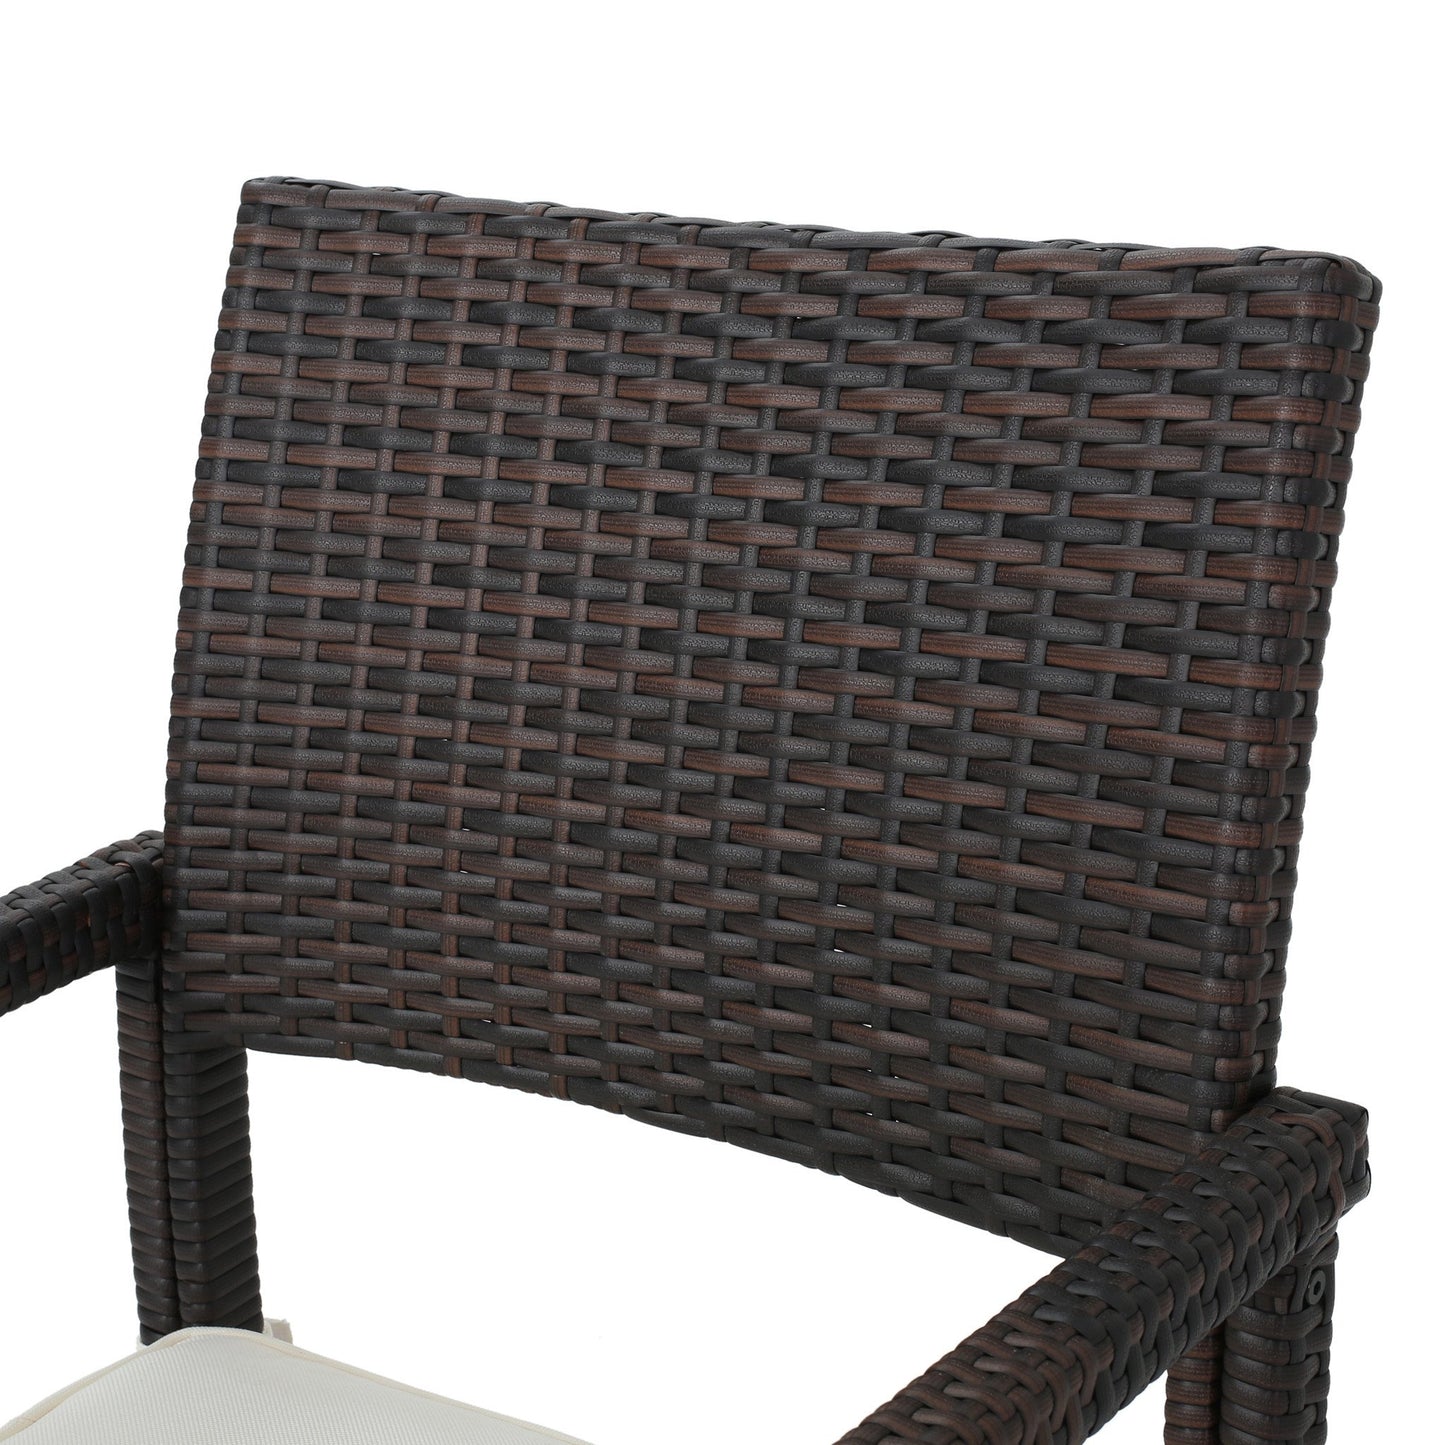 Edene Outdoor Wicker Dining Chairs Water Resistant Cushions (Set of 2)